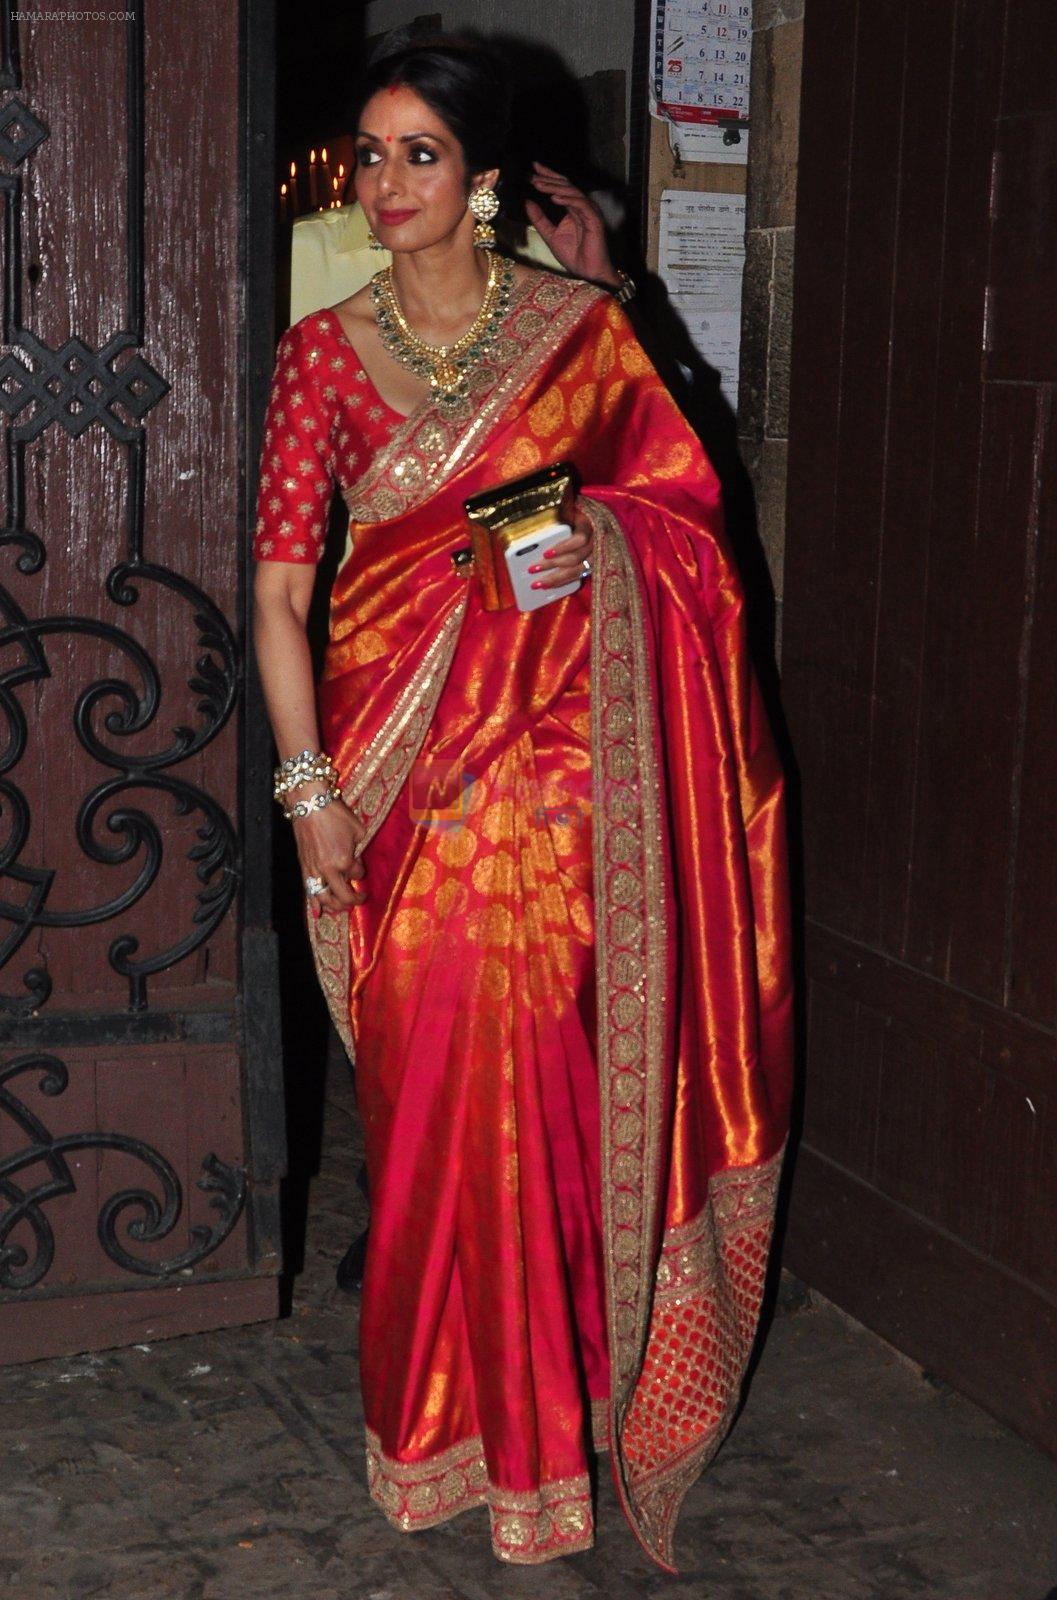 Sridevi celebrate Karva Chauth at Anil Kapoor�s house in Juhu on 19th Oct 2016